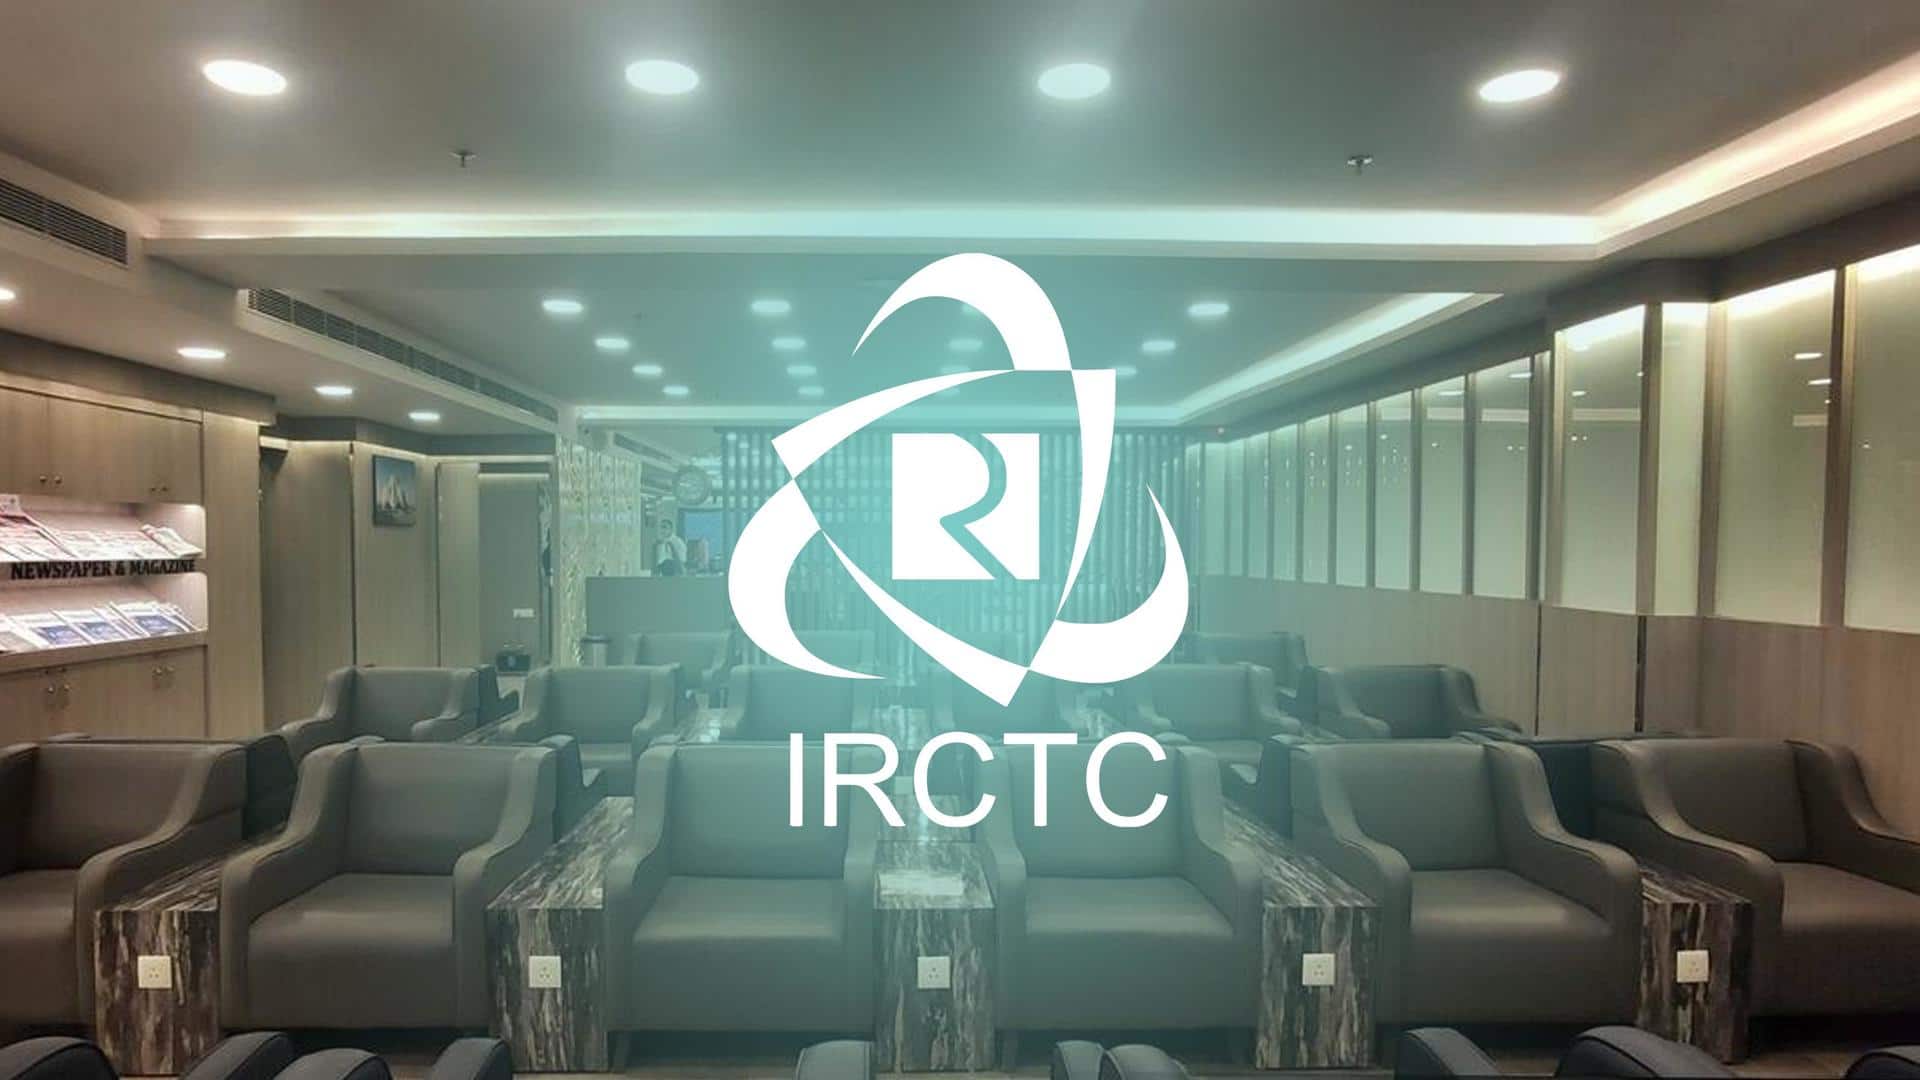 Travel in luxury! Do you know IRCTC offers executive lounges